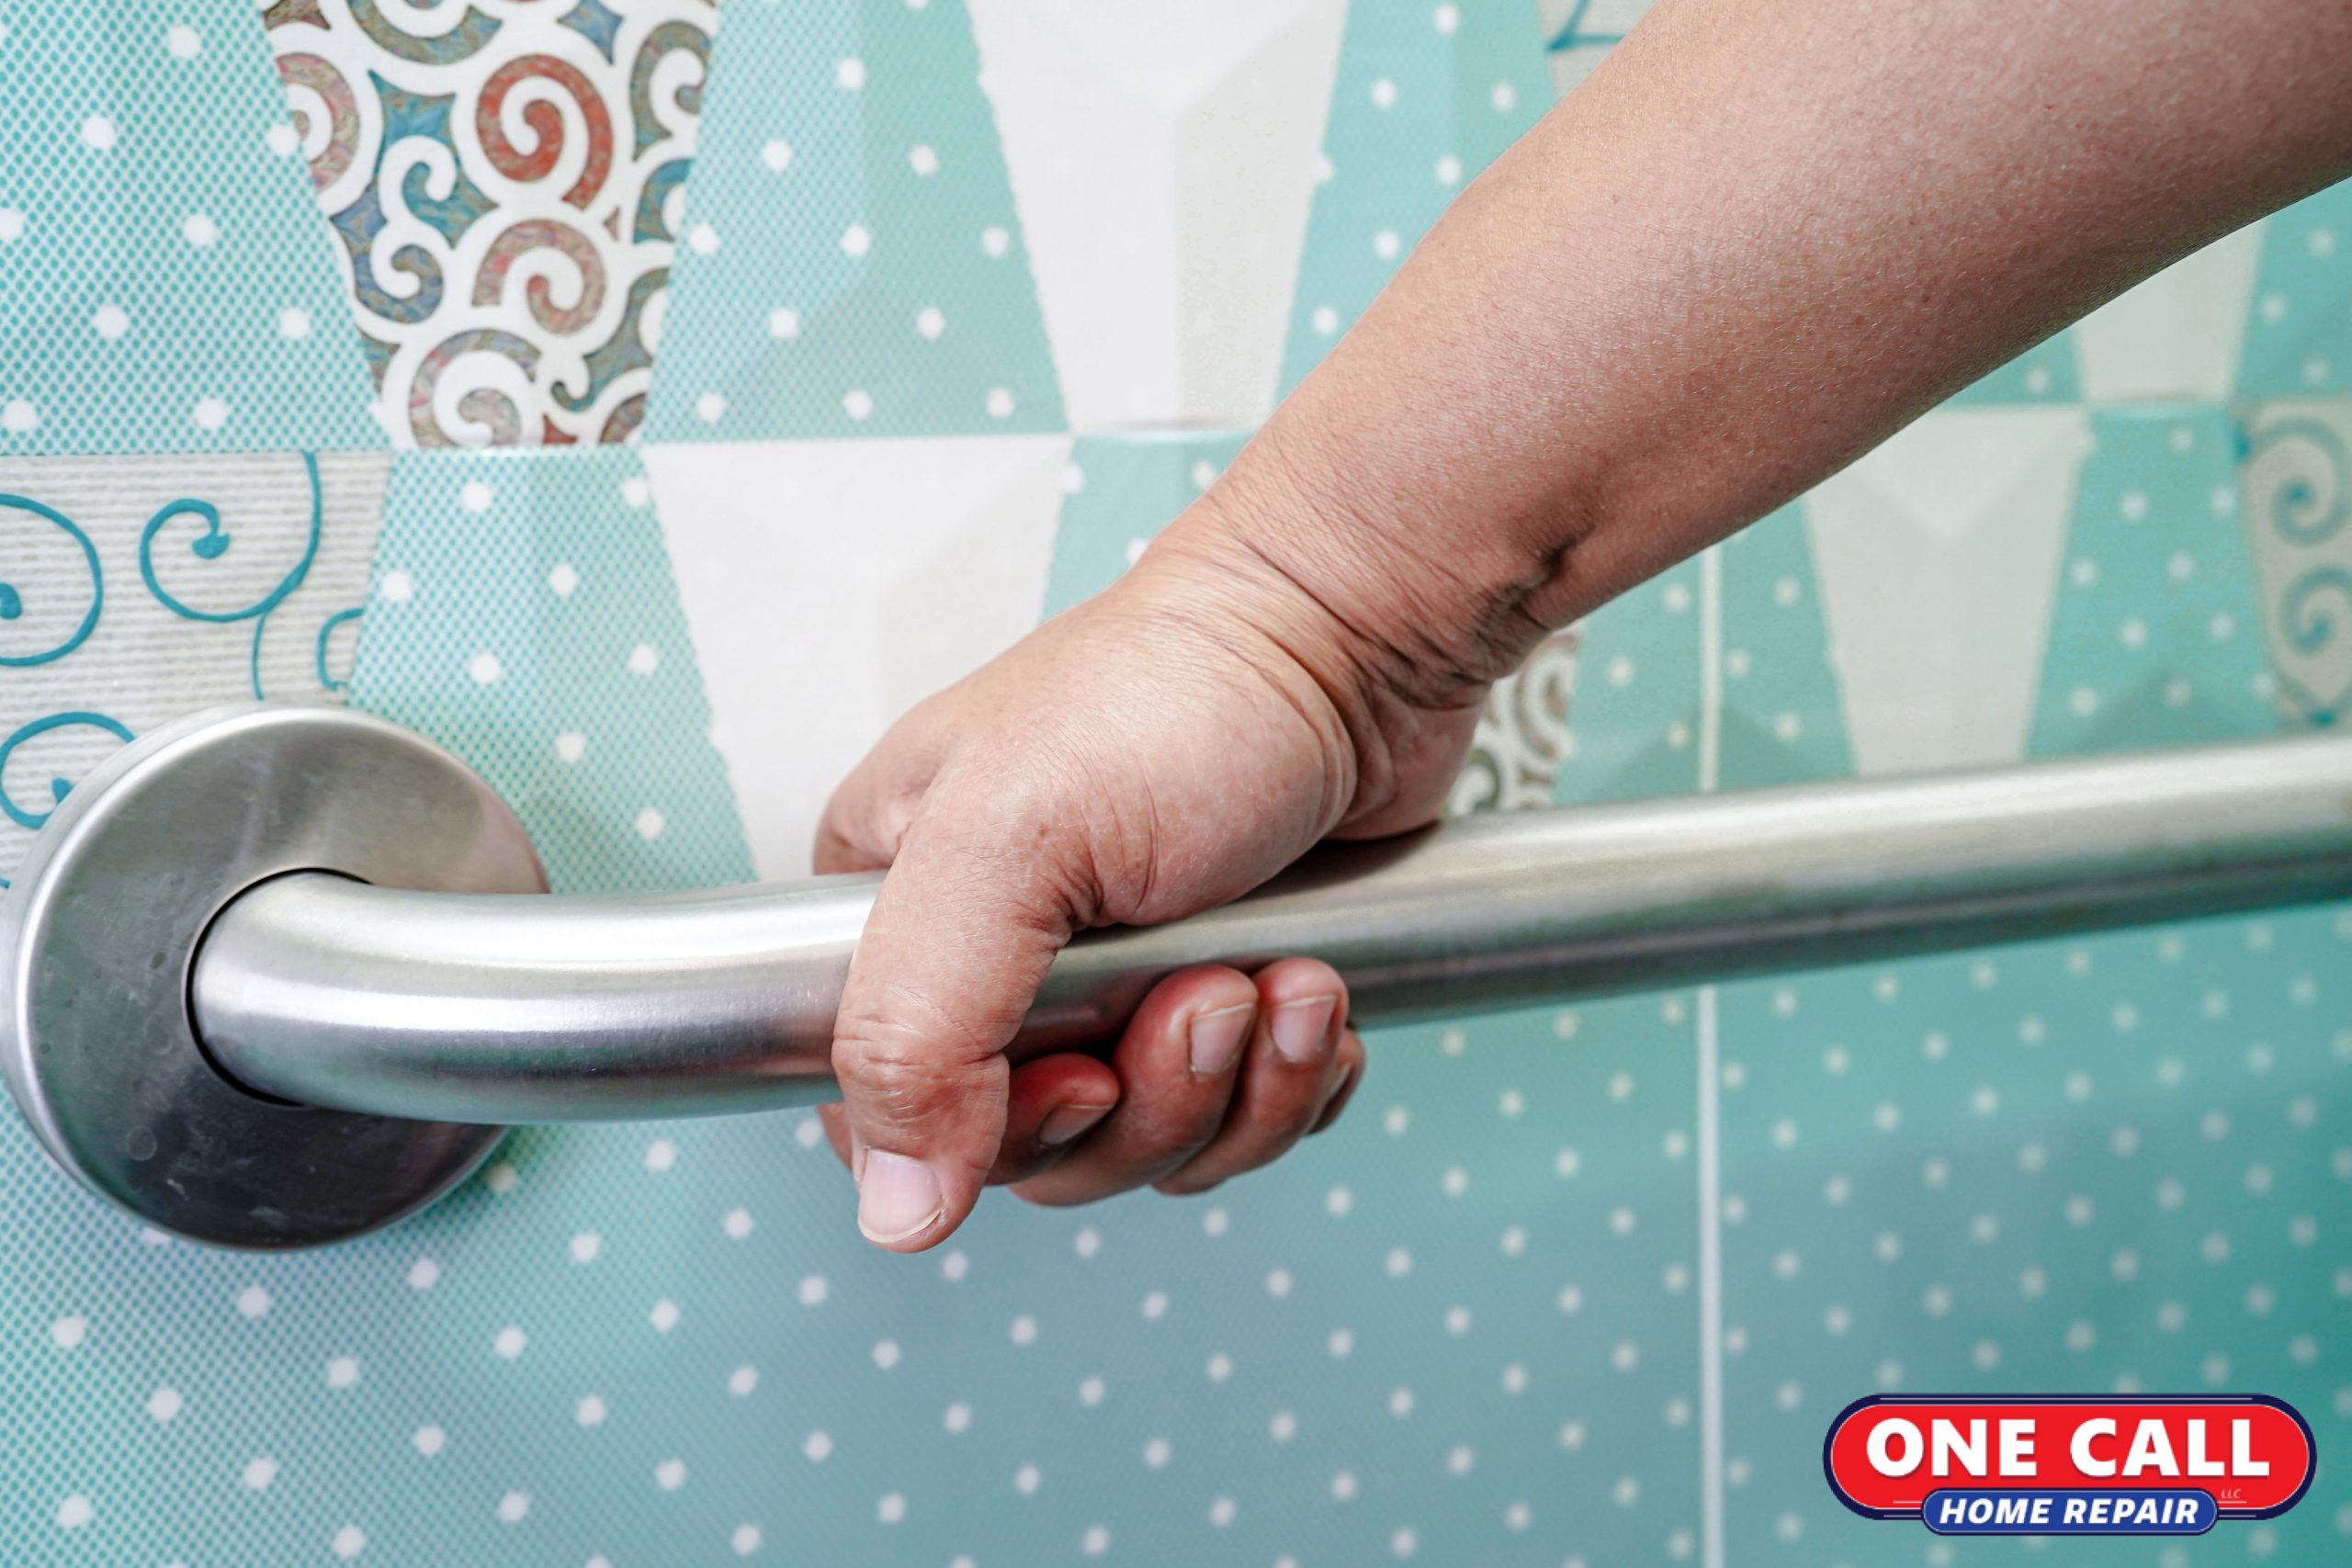 Ensure the Safety of a Disabled Loved One with ADA Handrail and Grab Bars for a Shoreline Home